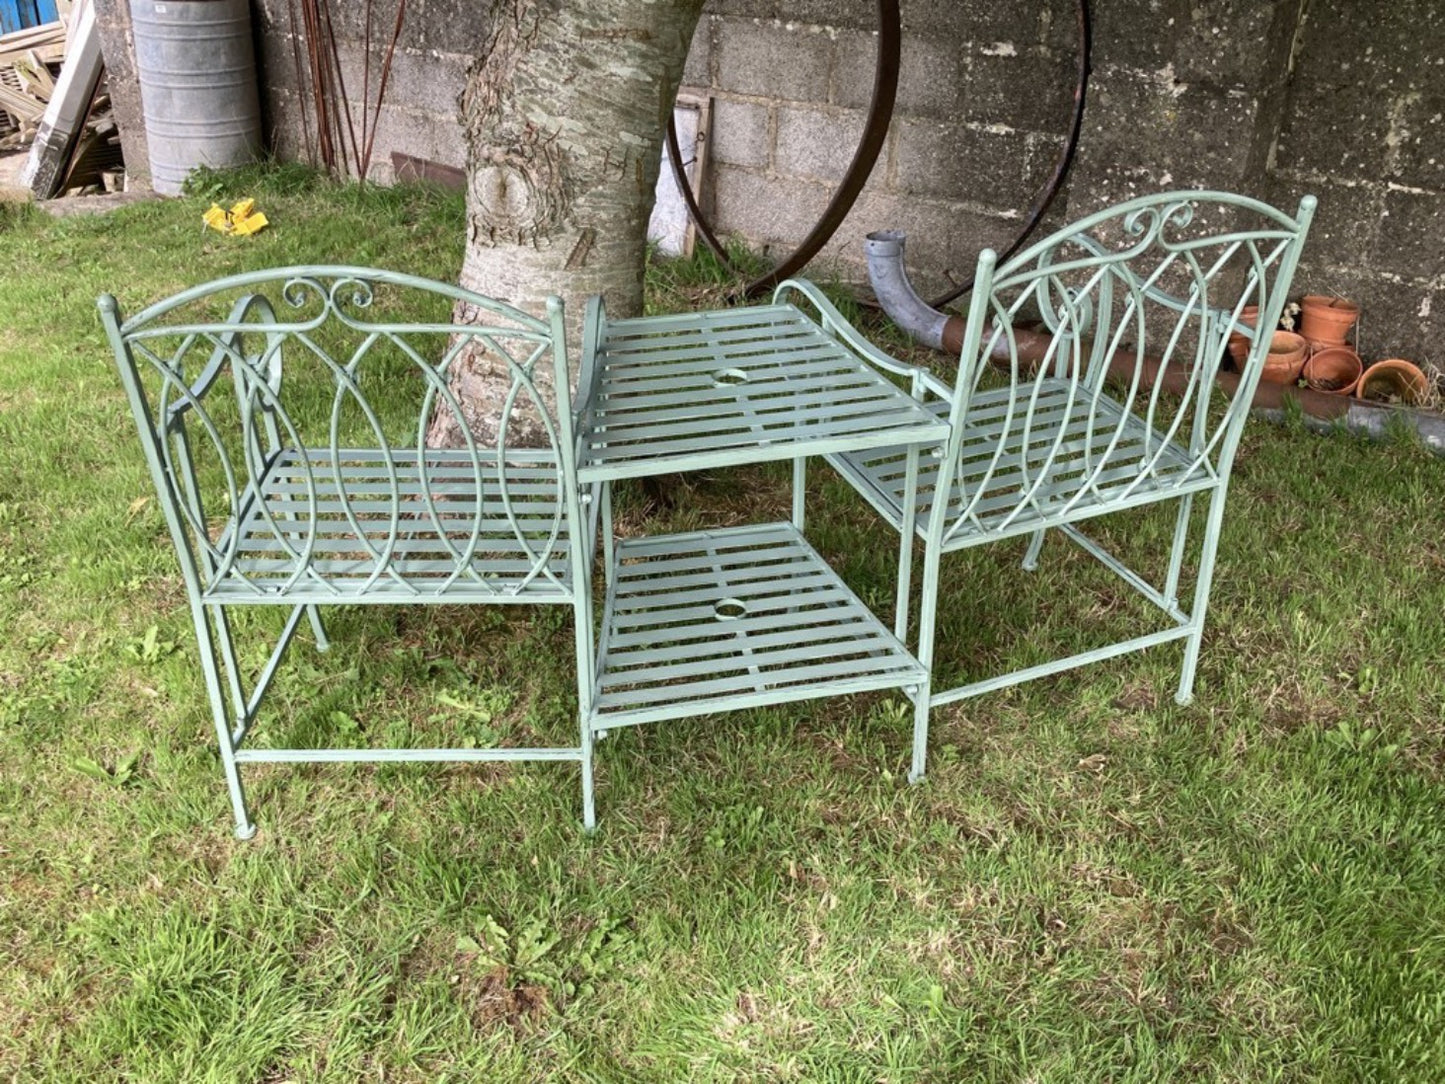 Light Green Lovers Wrought Iron Style Garden Bench Seat Steel Two Seater